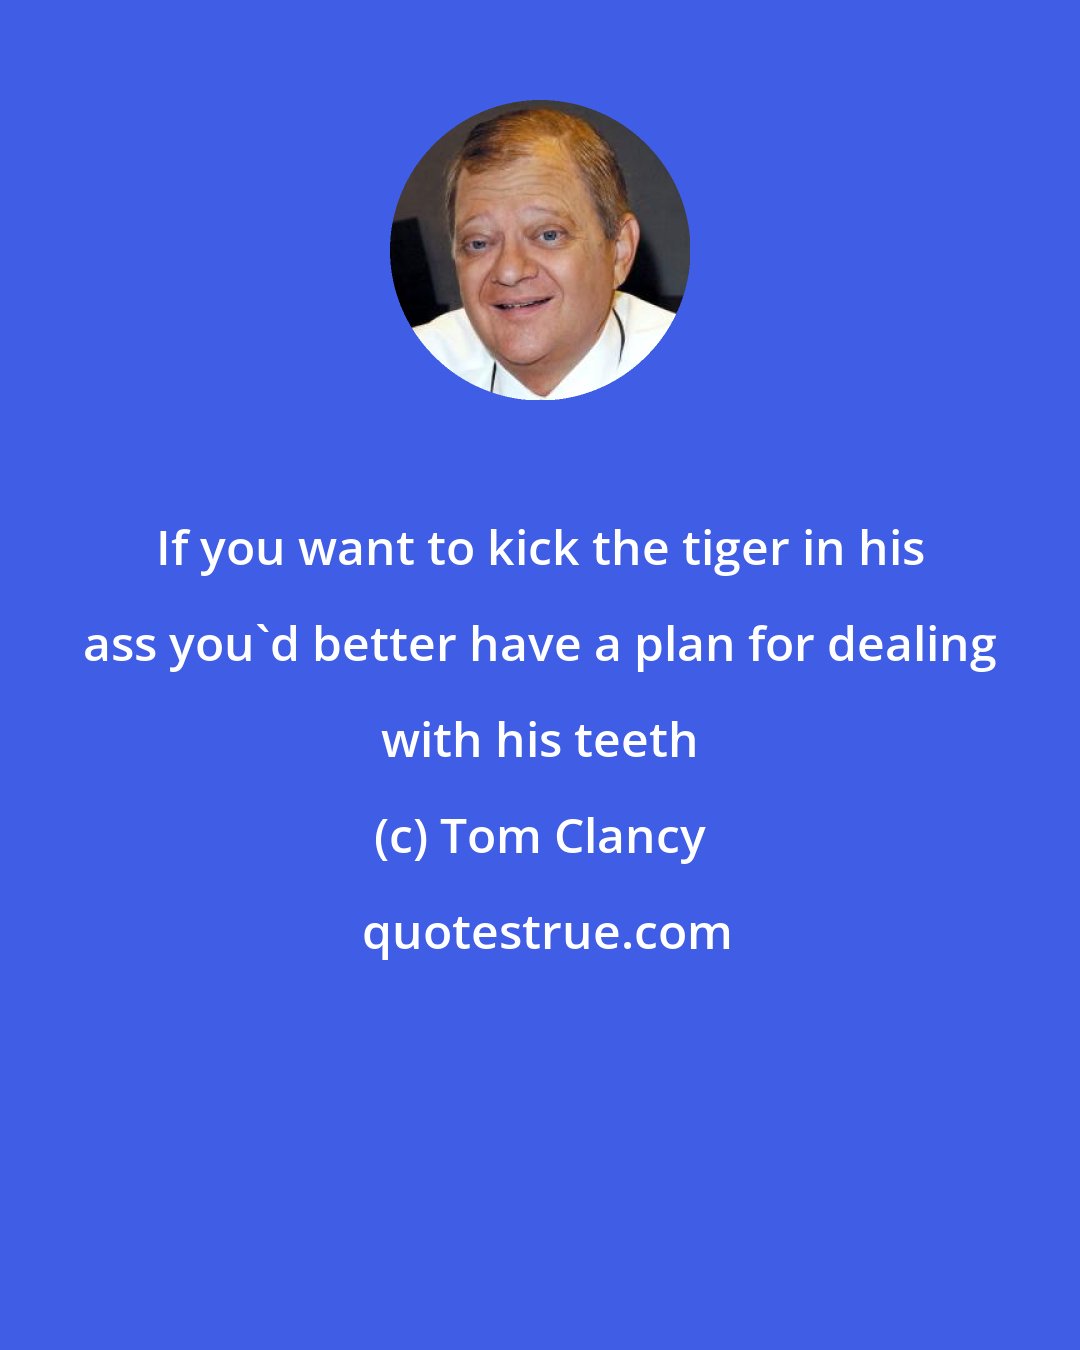 Tom Clancy: If you want to kick the tiger in his ass you'd better have a plan for dealing with his teeth